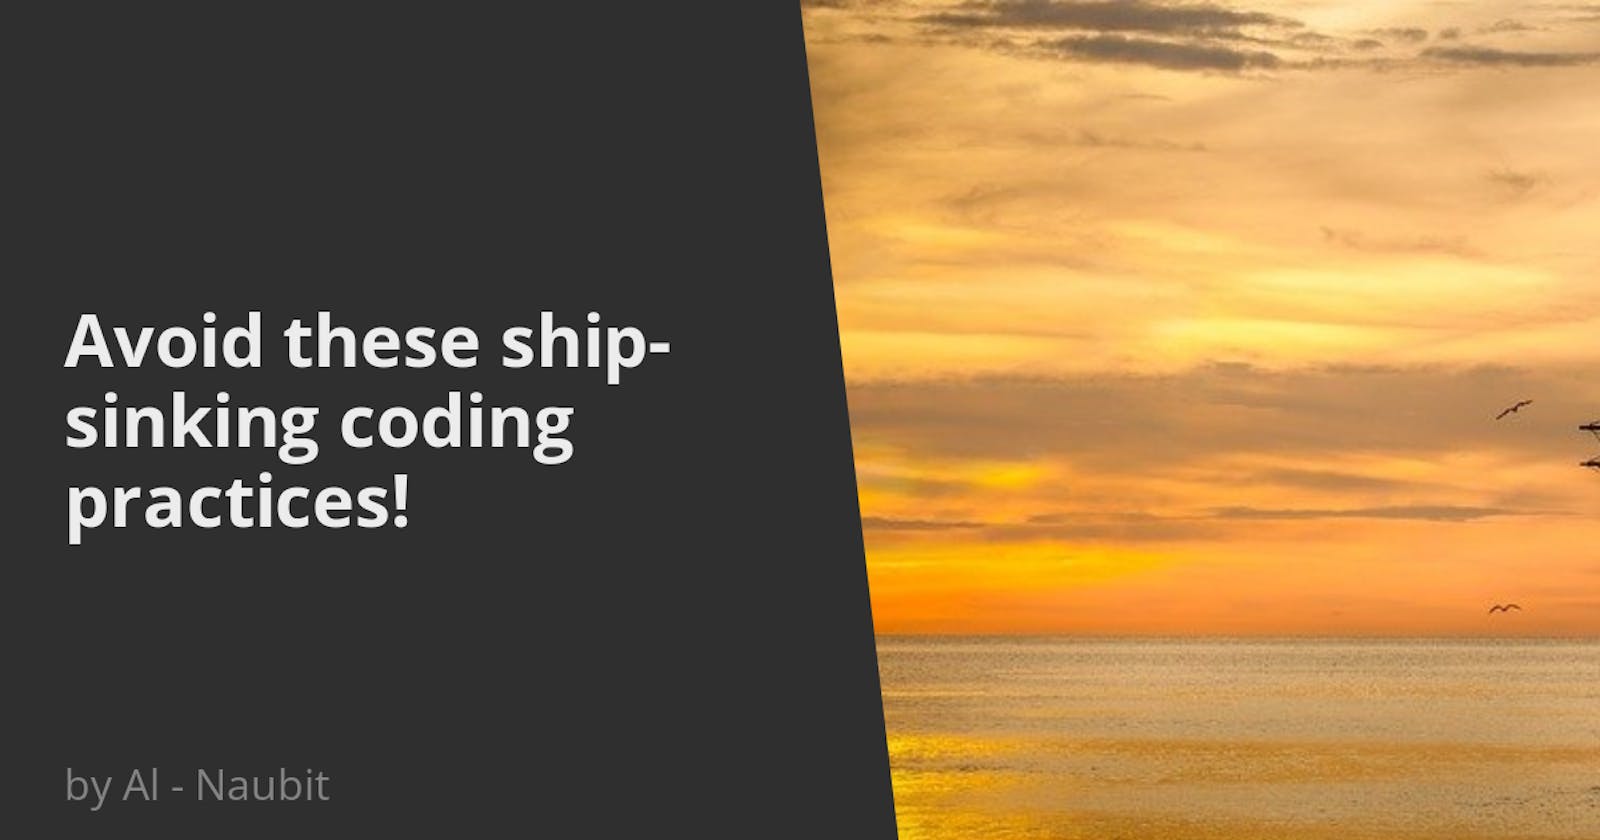 Avoid these ship-sinking coding practices!